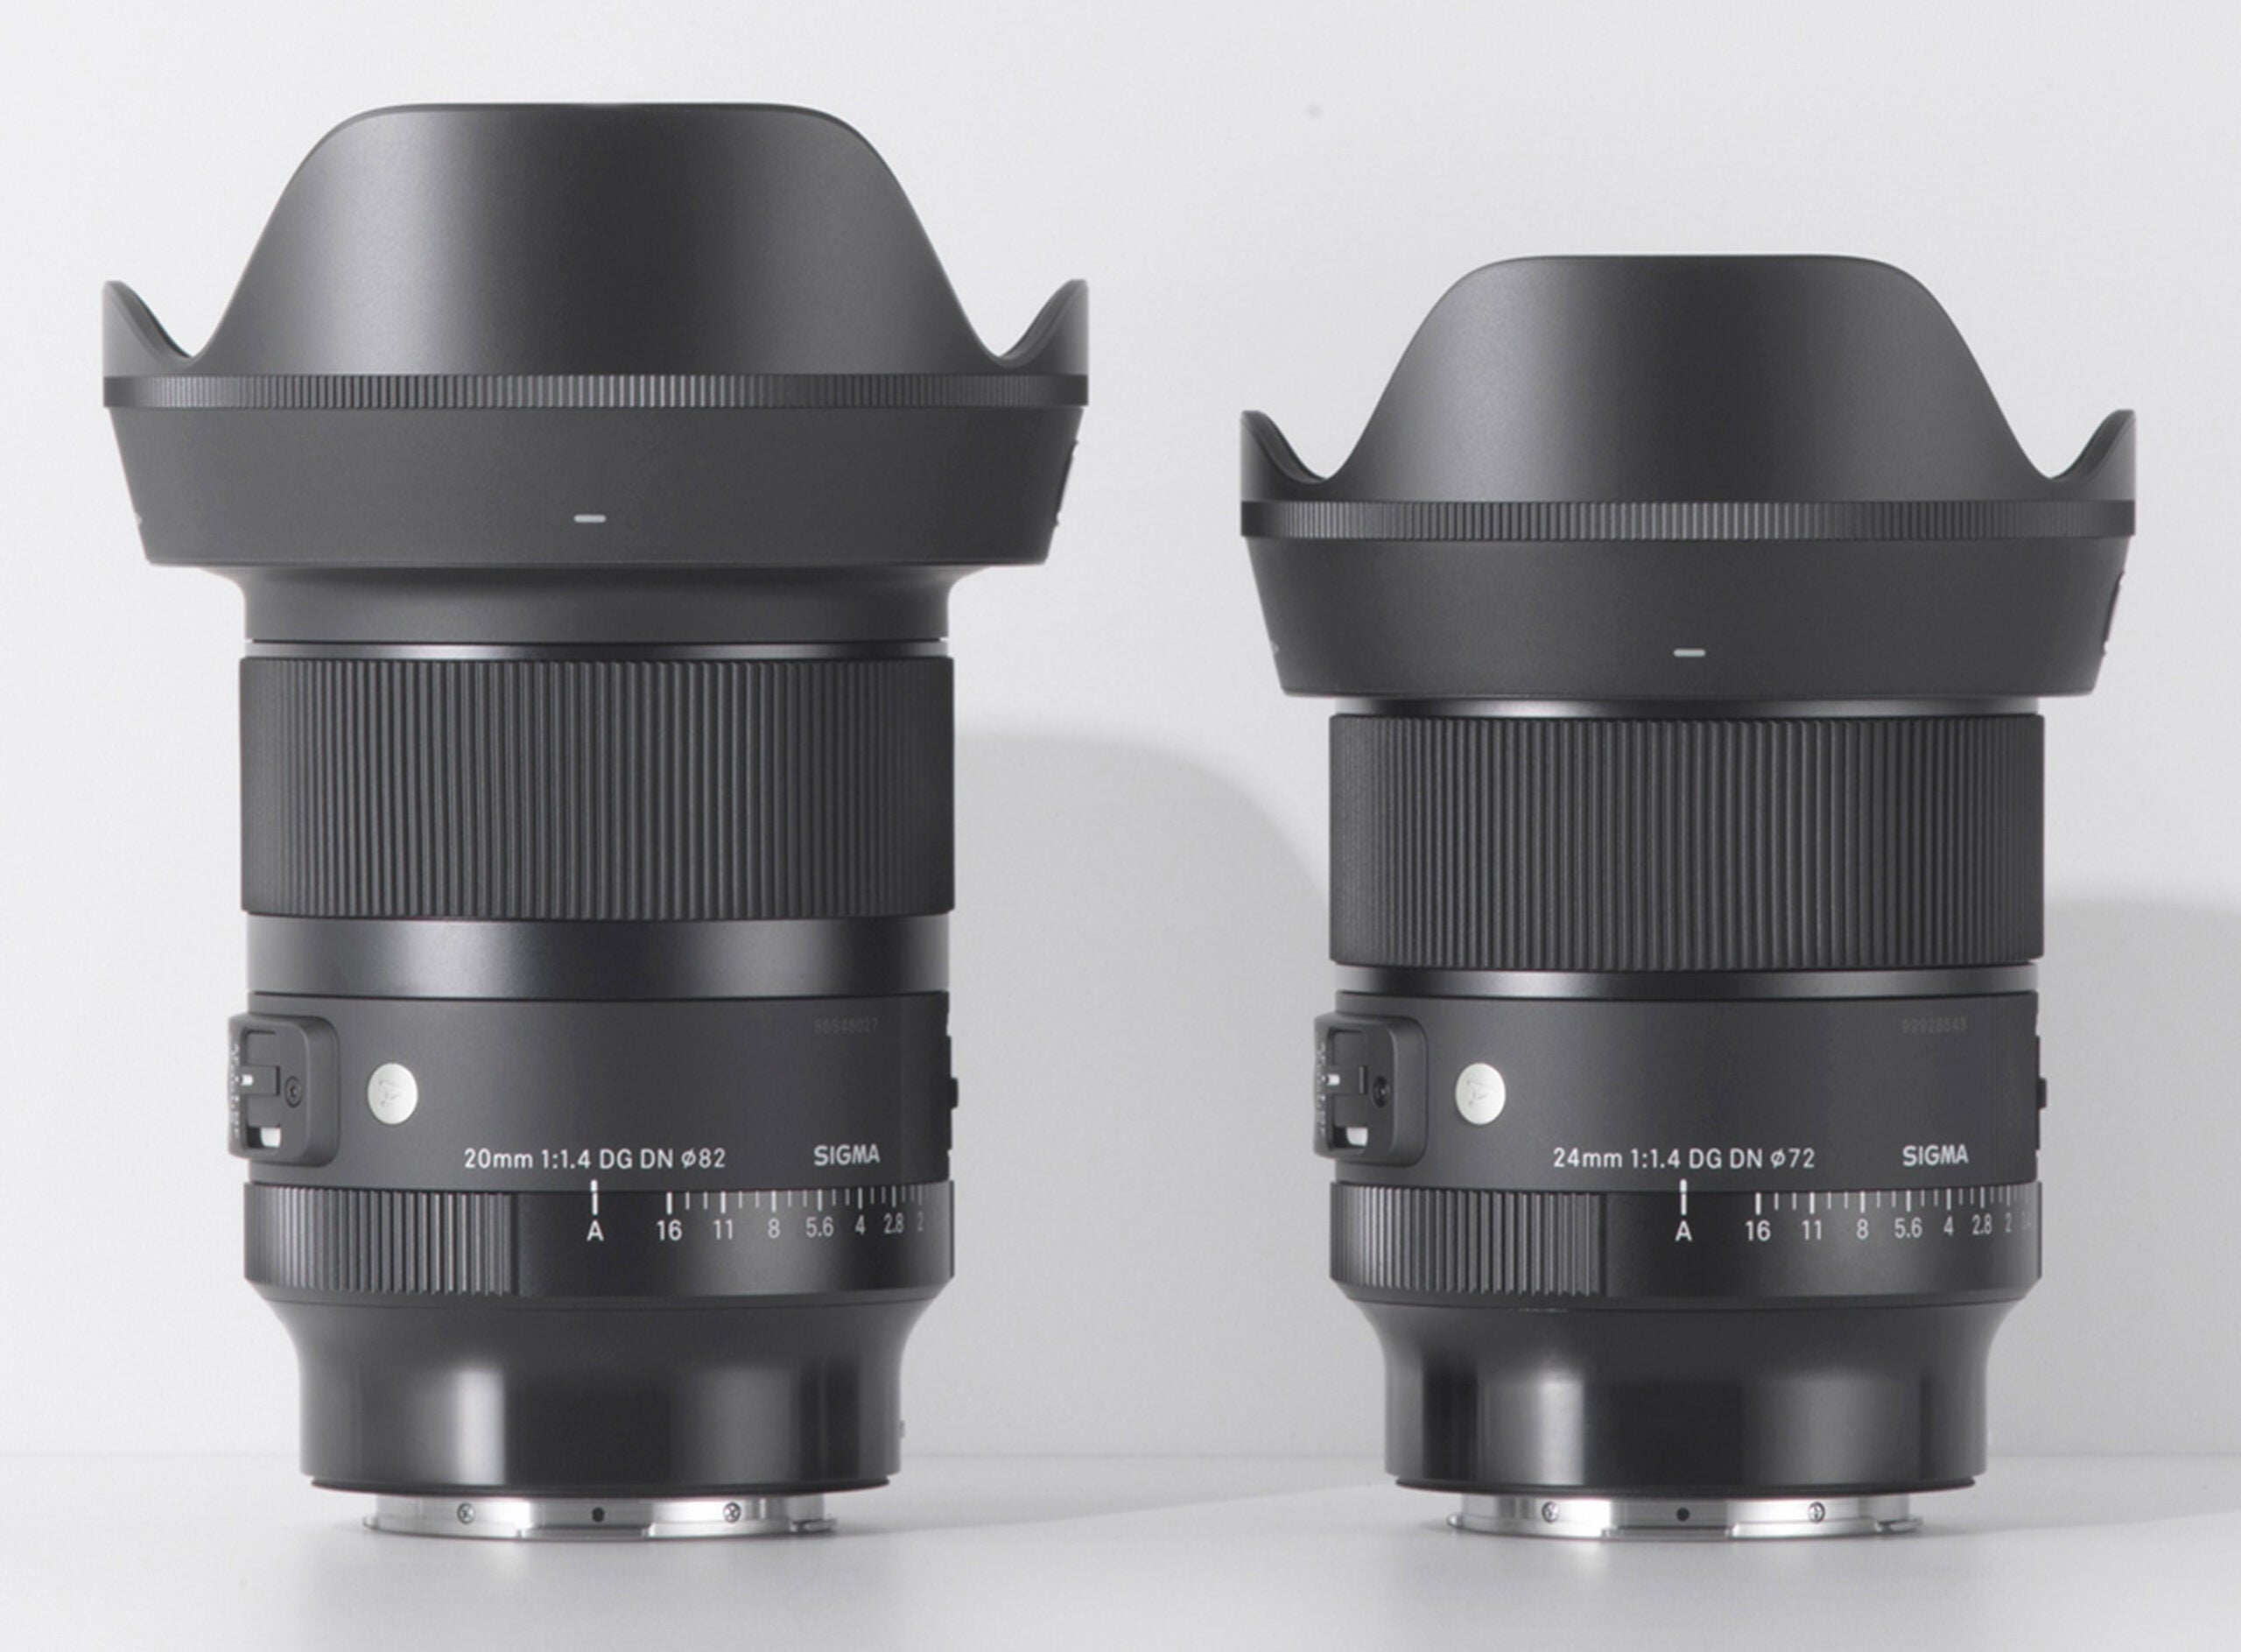 The new Sigma 20mm and 24mm f/1.4 full-frame lenses